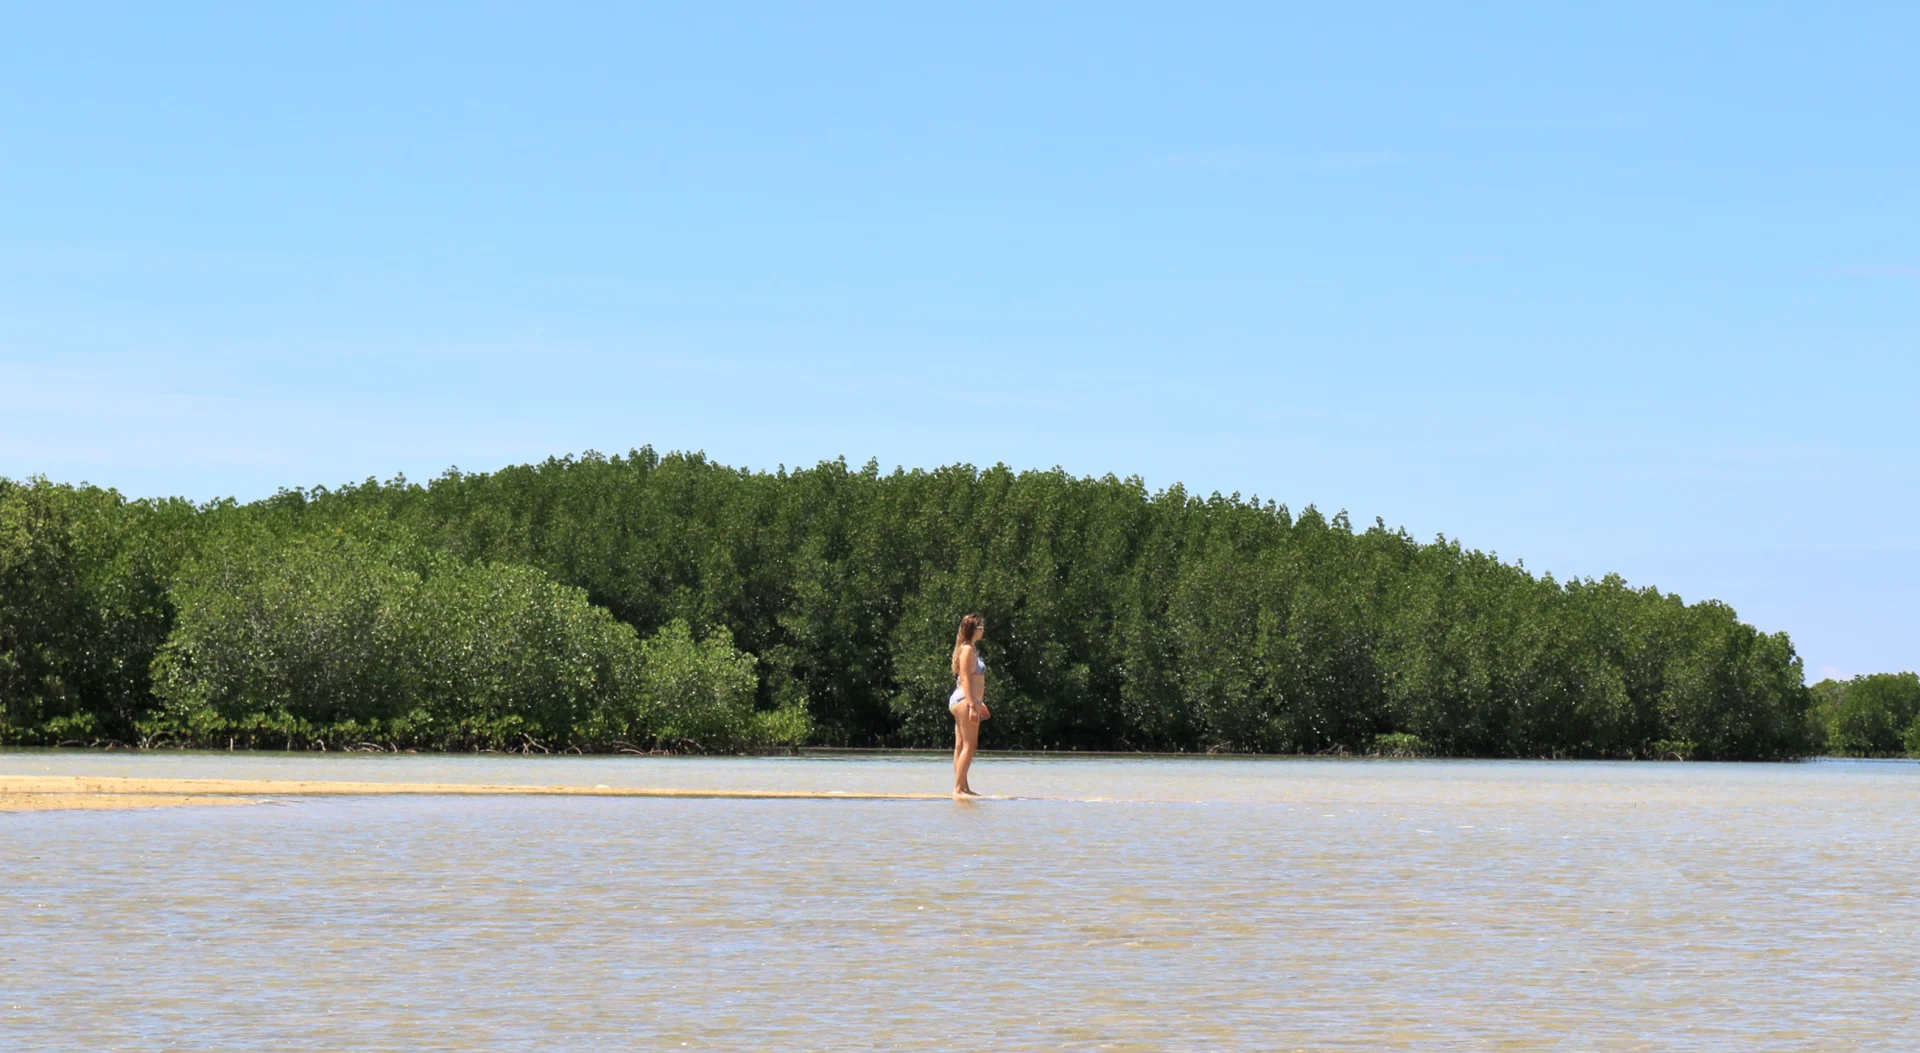 Deanna standing on a thin sliver of sand surrounded by water on the disappearing Luli island